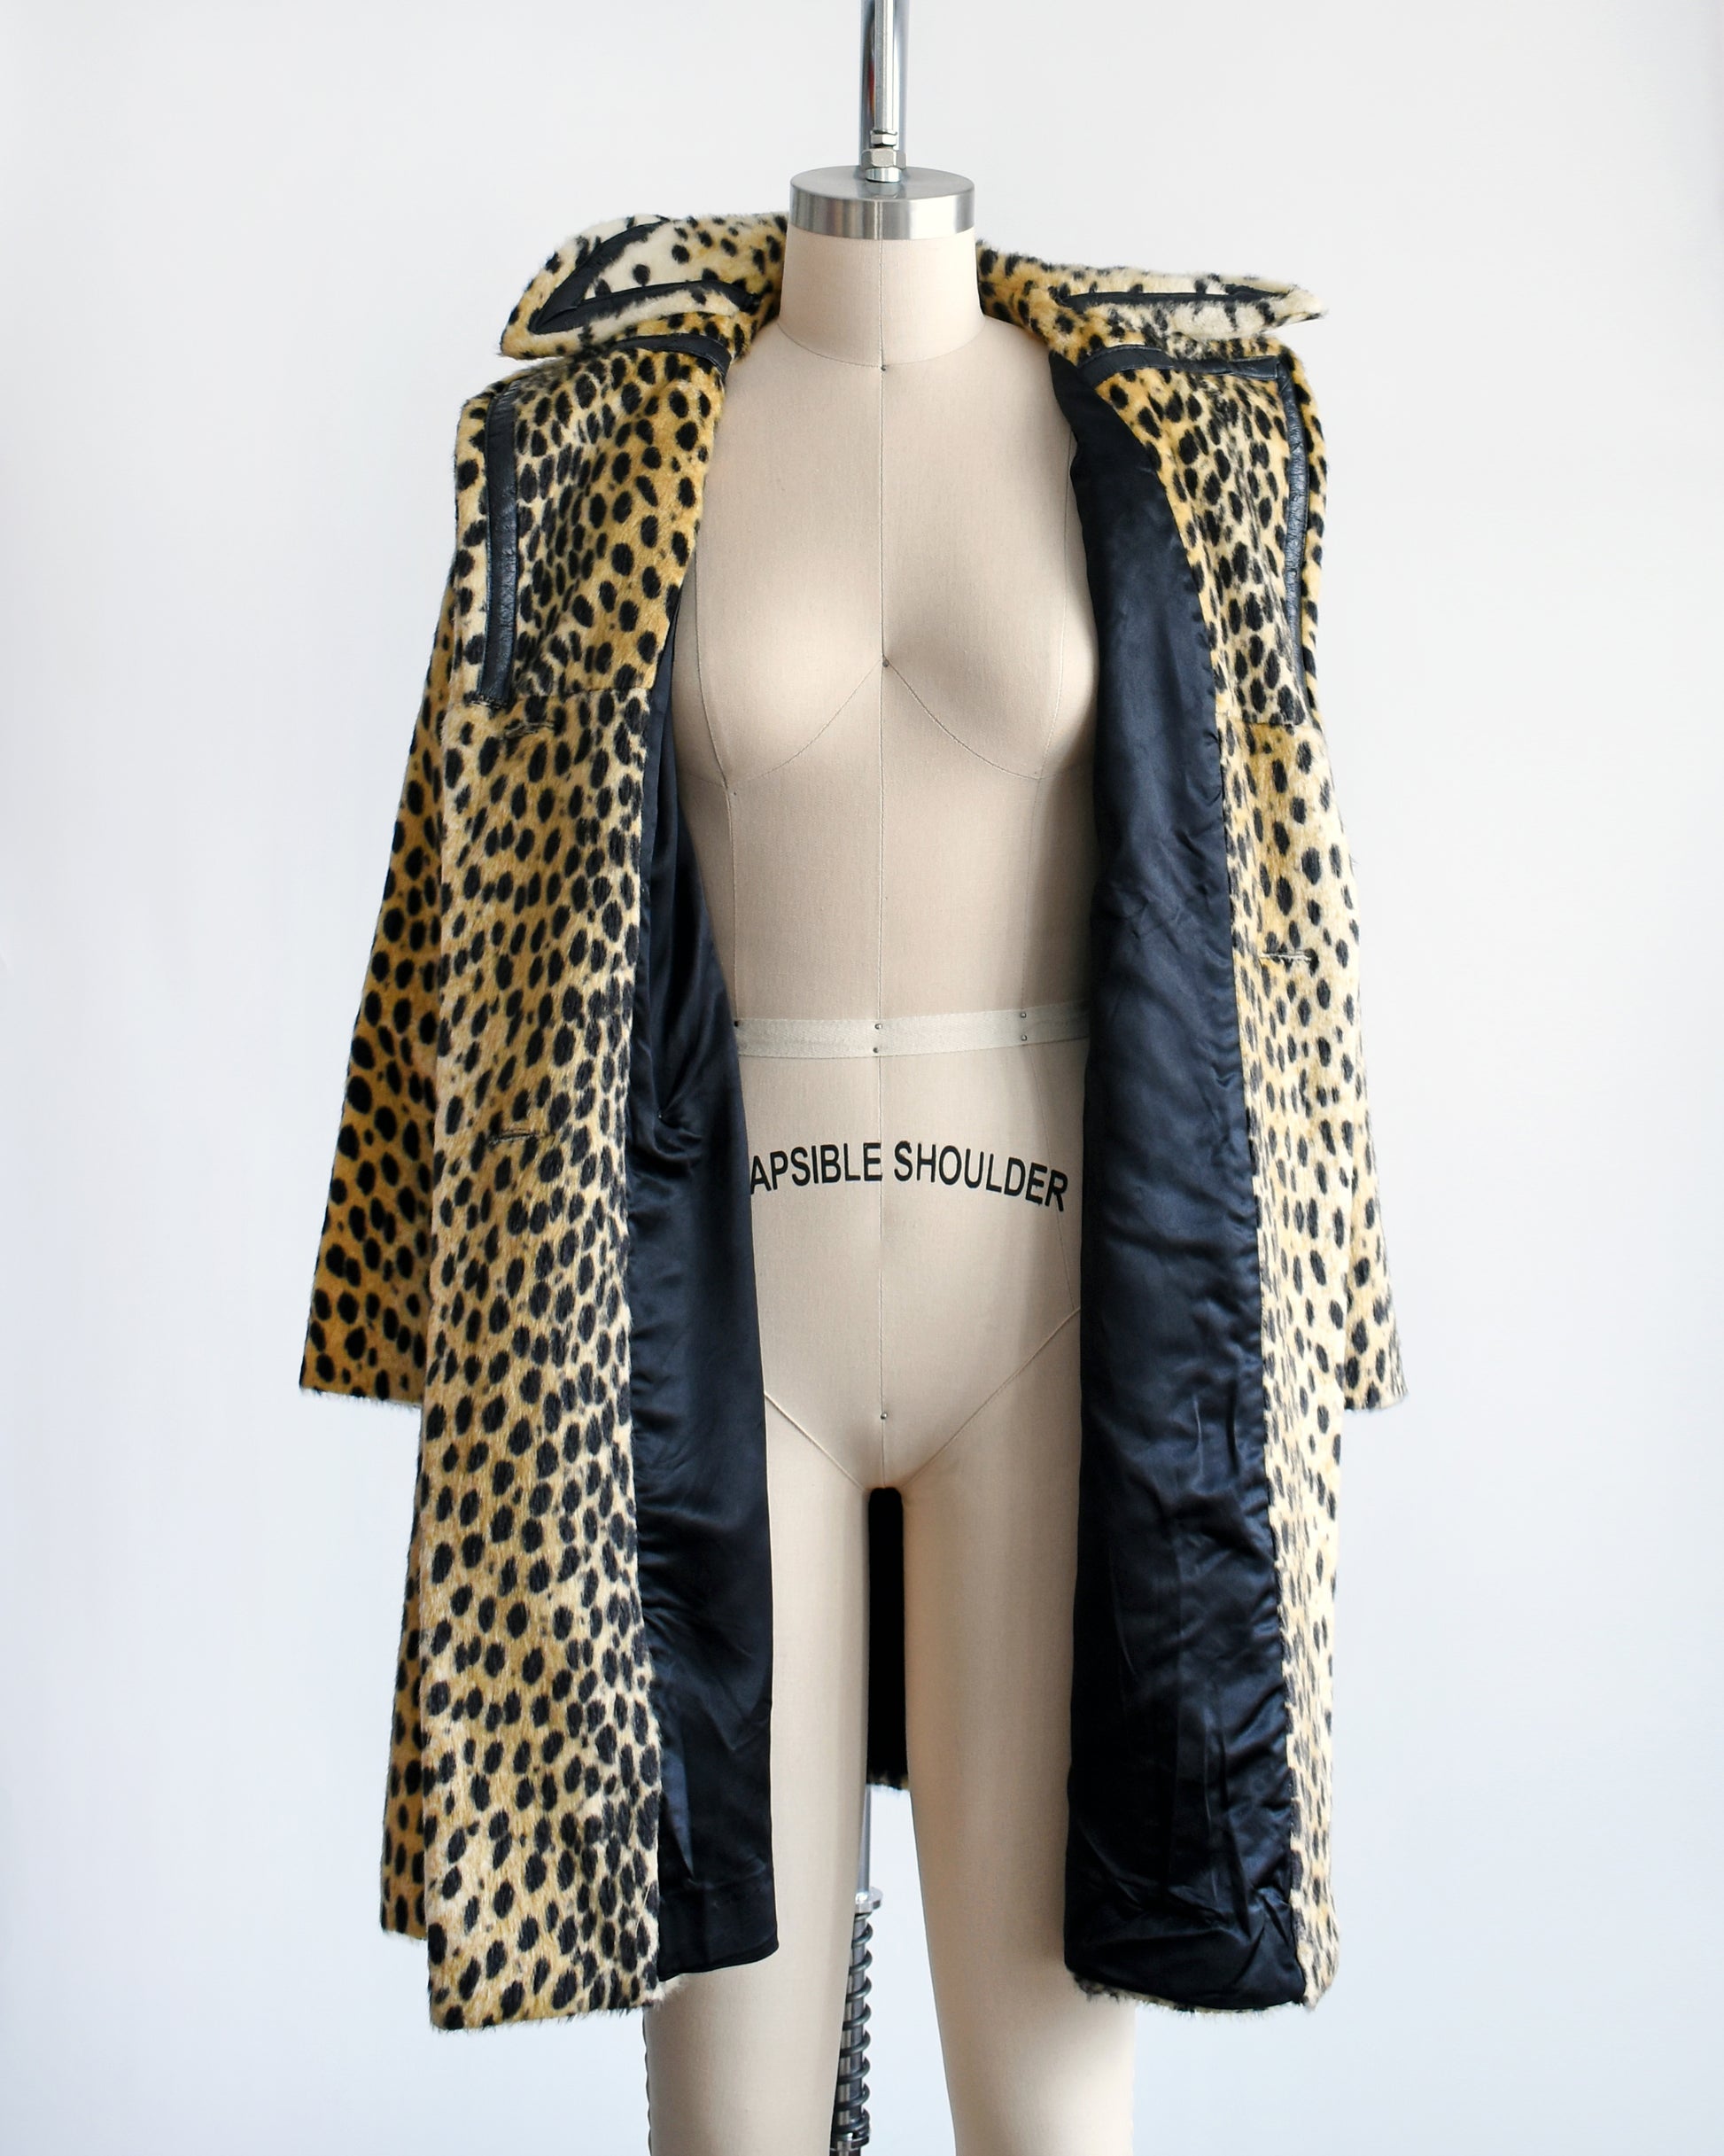 A faux fur cheetah print coat features golden faux fur with black spots and black faux leather trim. The coat is open in this photo showing the black lining.